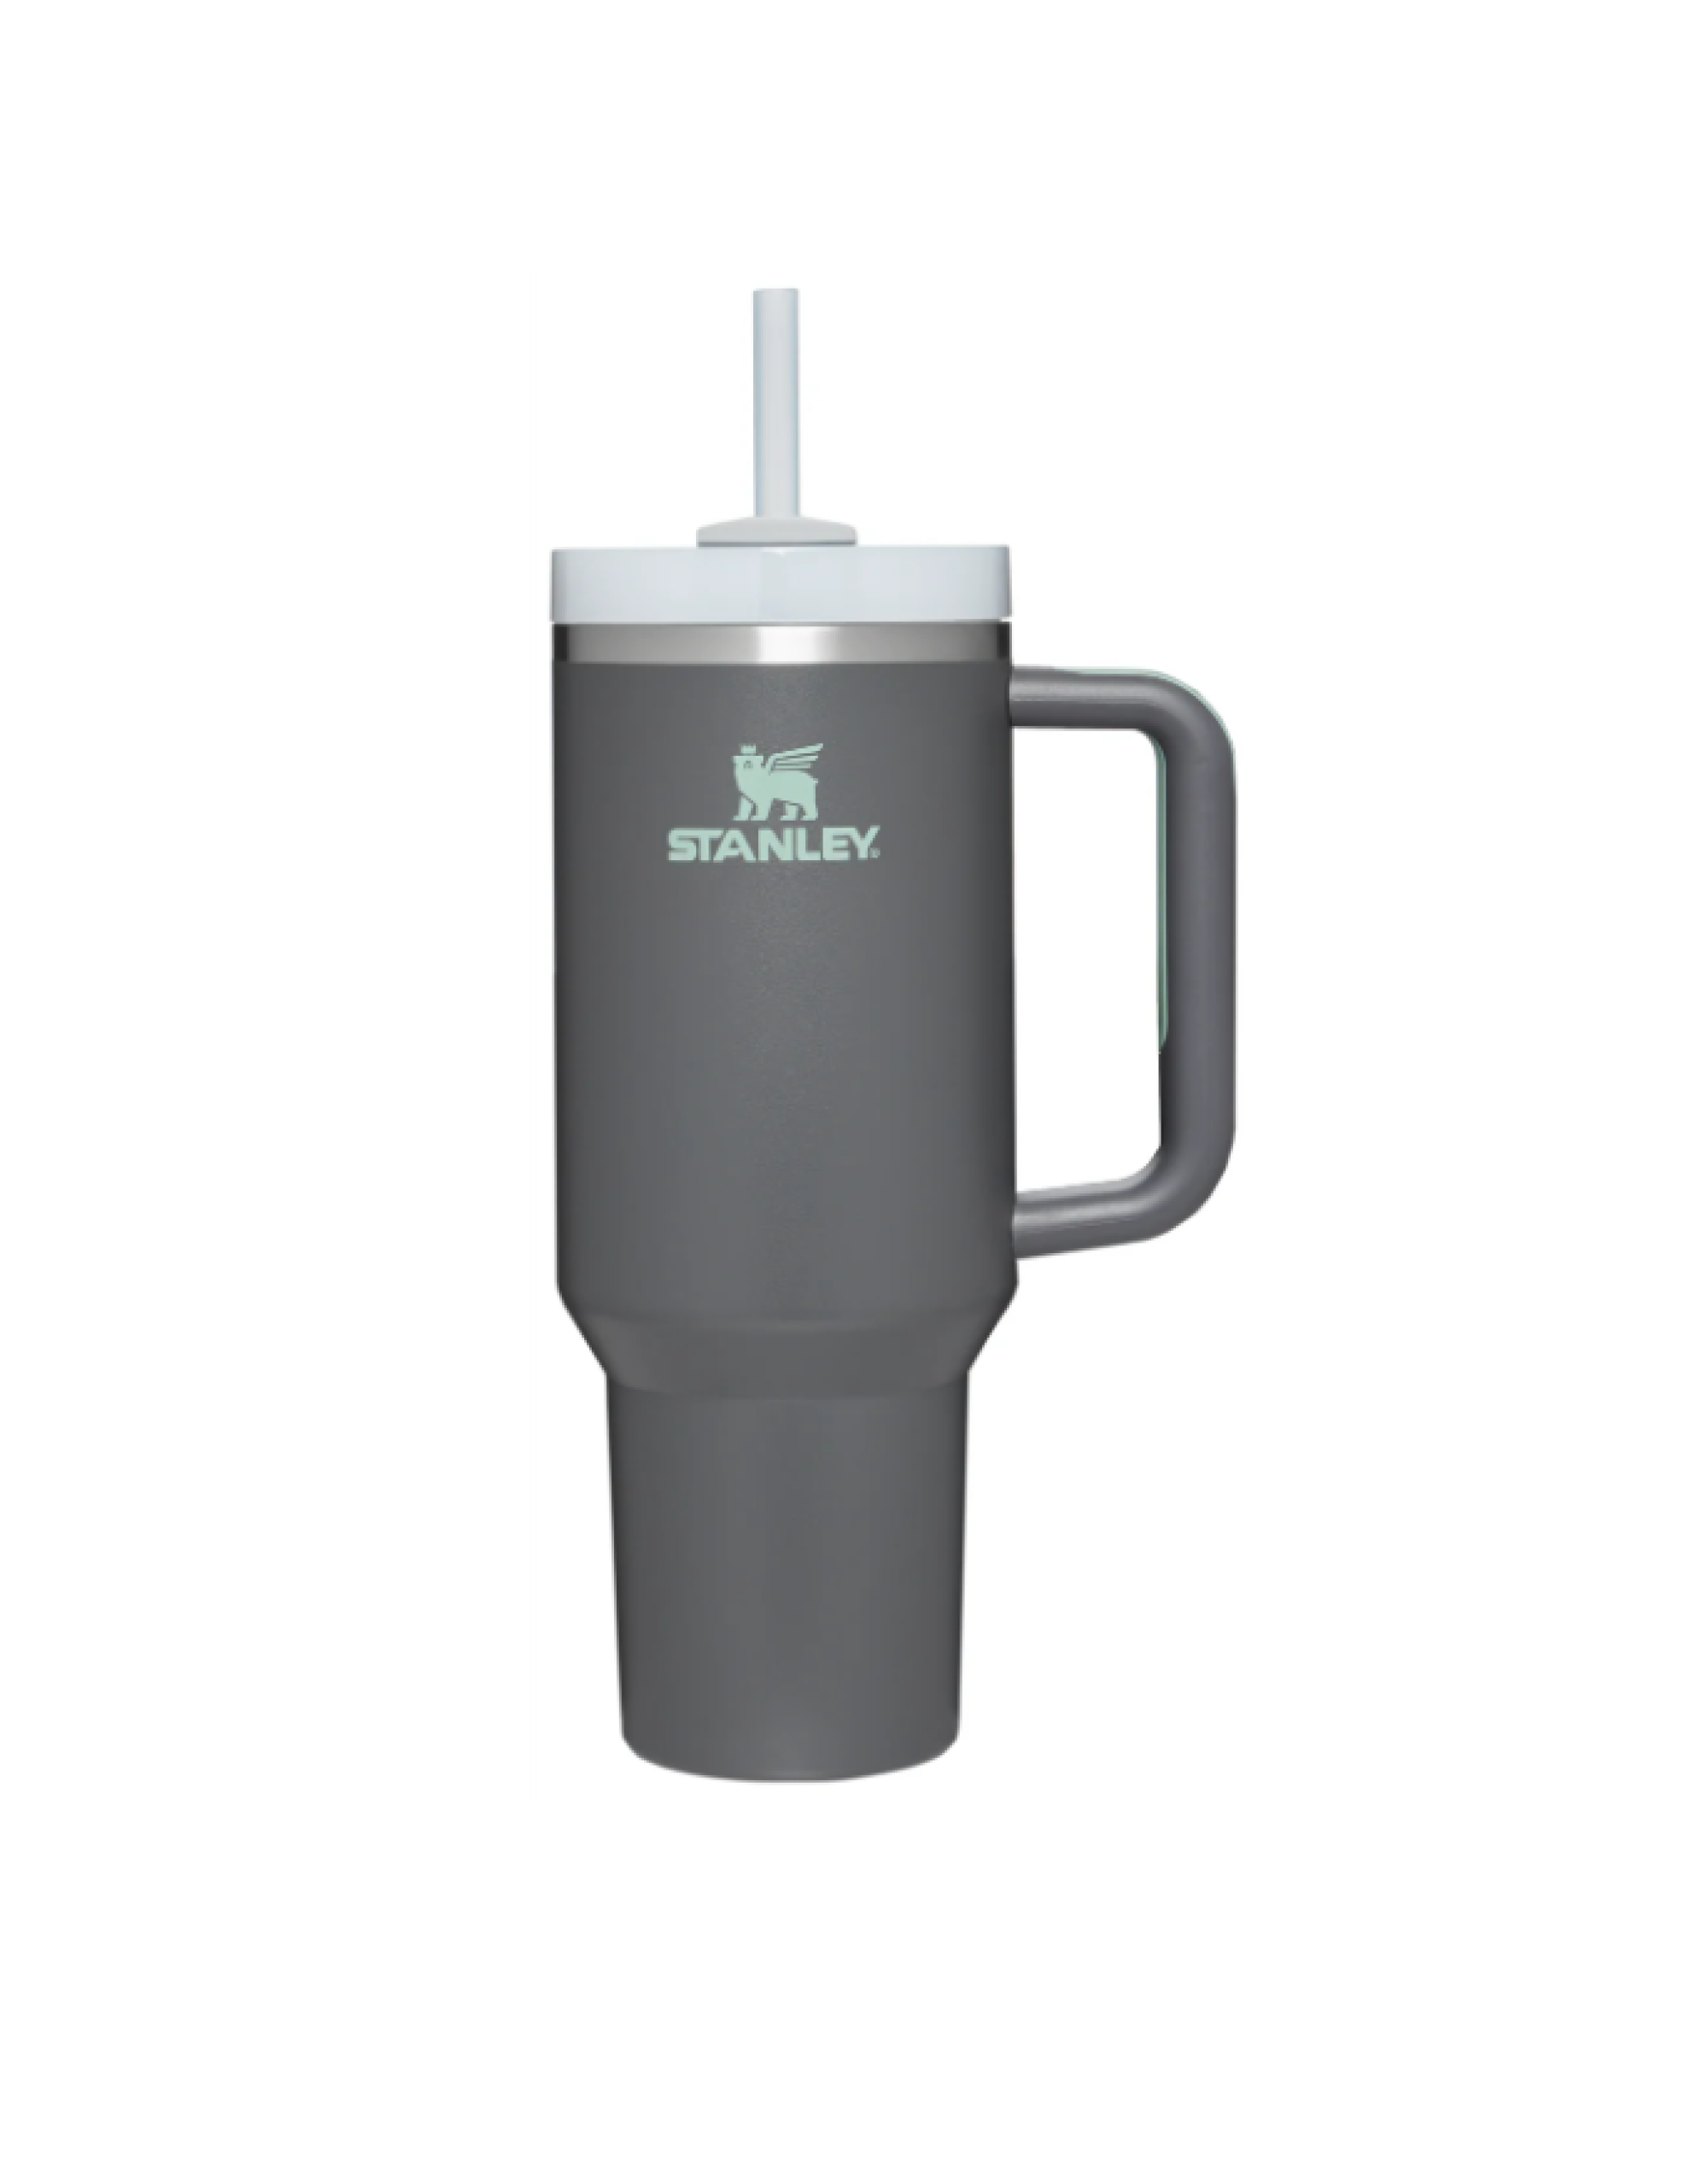 Stanley 40 oz. Quencher H2.0 FlowState Tumbler - Charcoal